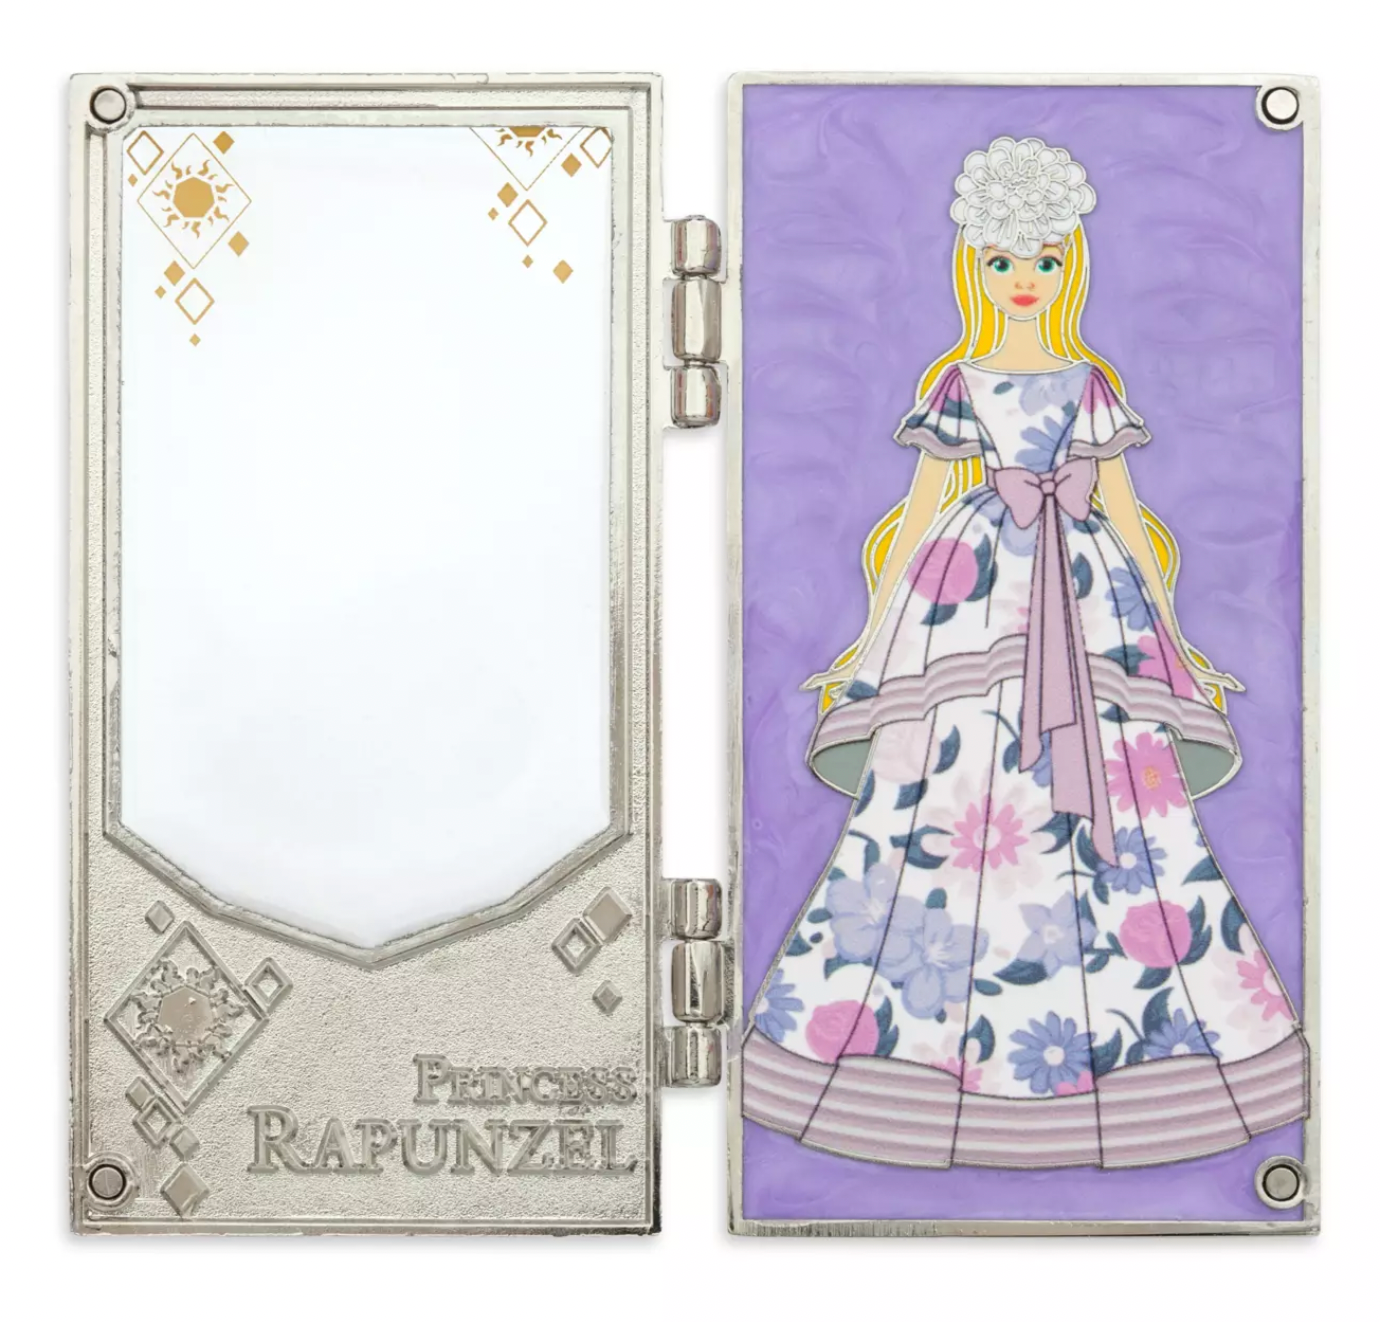 Disney Designer Ultimate Princess Collection Rapunzel Hinged Pin Limited New